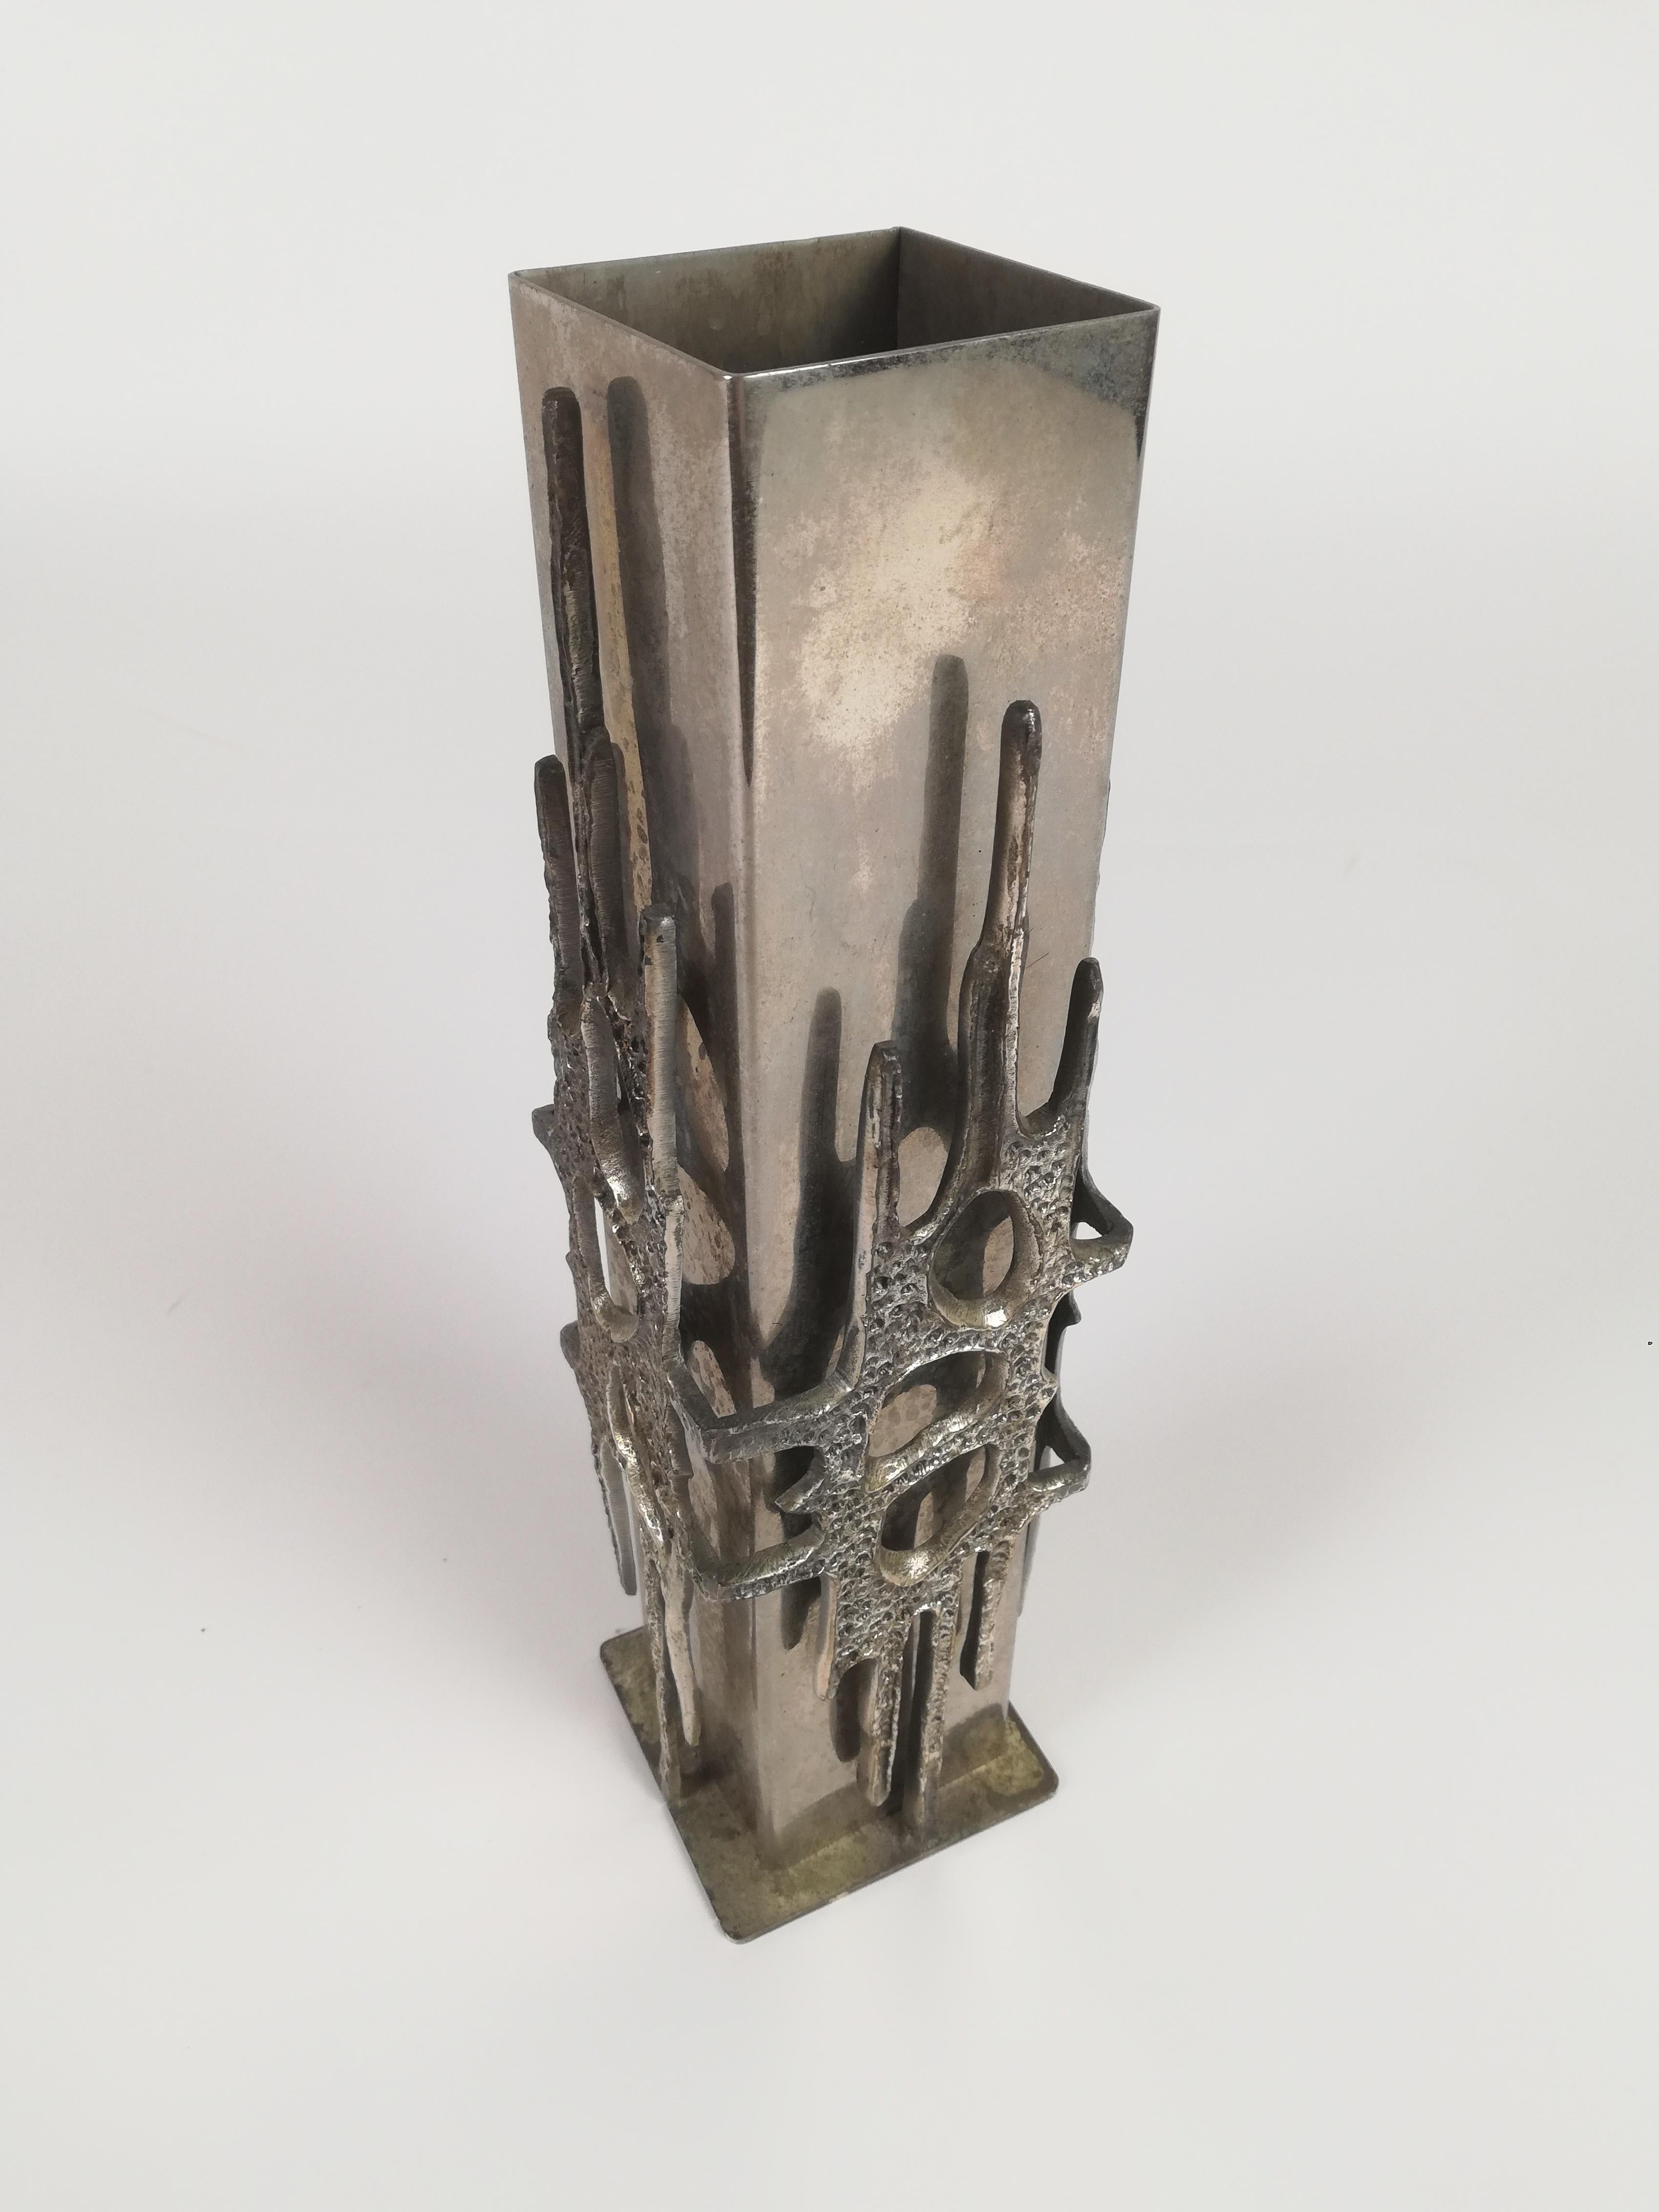 Brutalist Italian Steel Vase in the Style of Luciano Frigerio, Italy 1970s For Sale 3